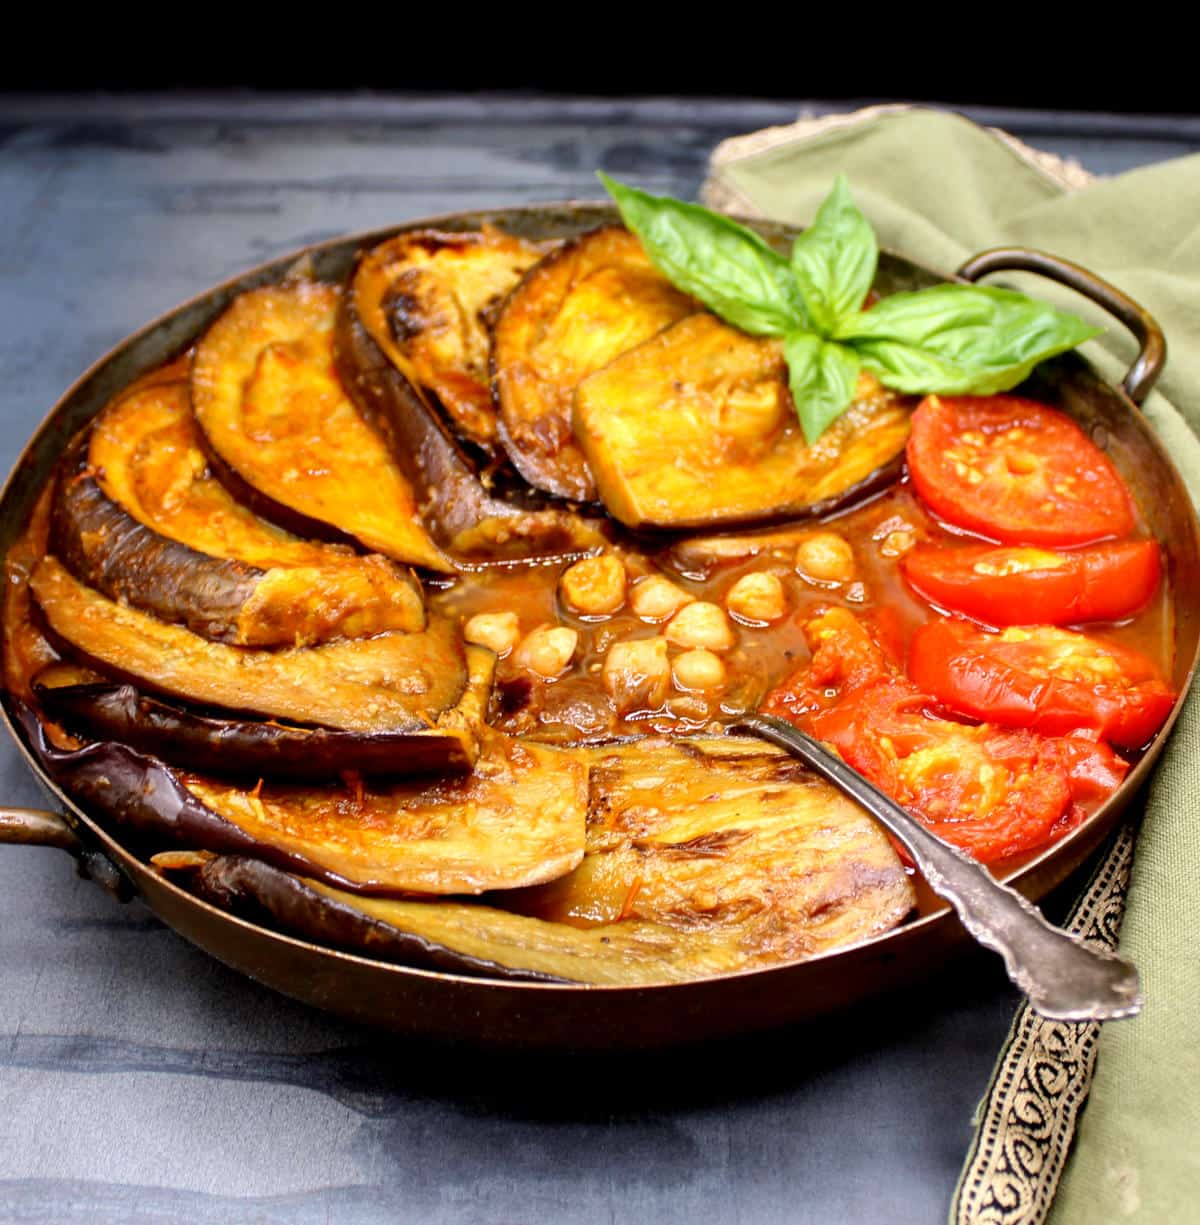 Khoresh bademjan in a copper pot with eggplant slices, tomatoes and basil garnish.